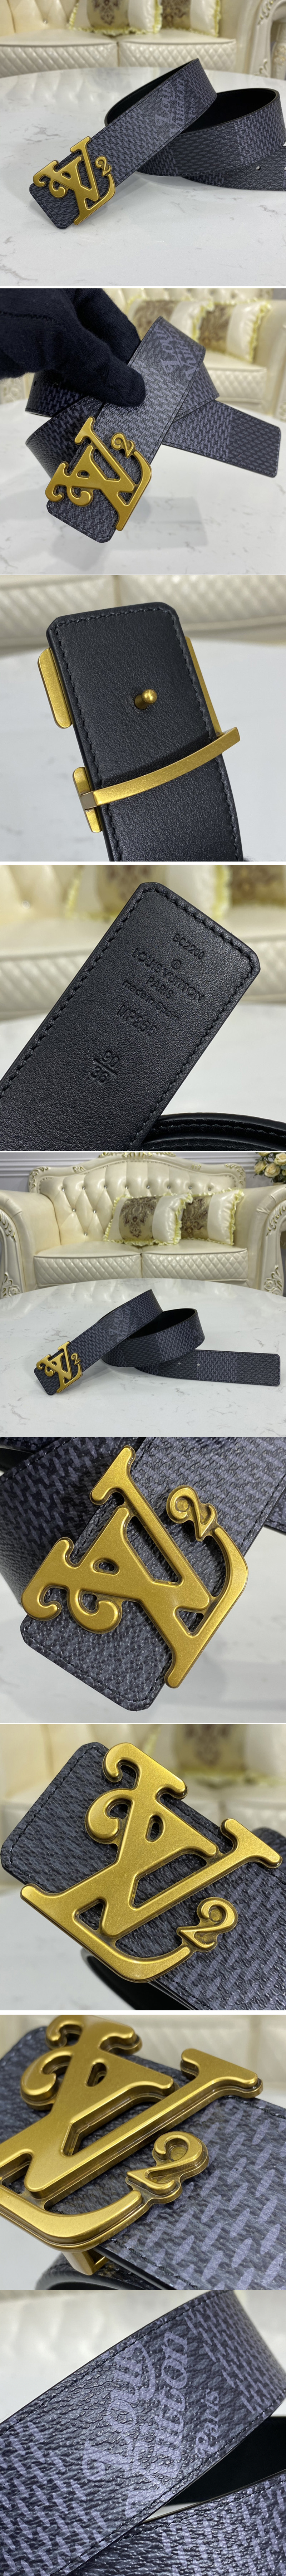 Replica Louis Vuitton MP255V LV Squared LV 40mm reversible belt in Damier Graphite Canvas/Black With Aged-Gold Buckle